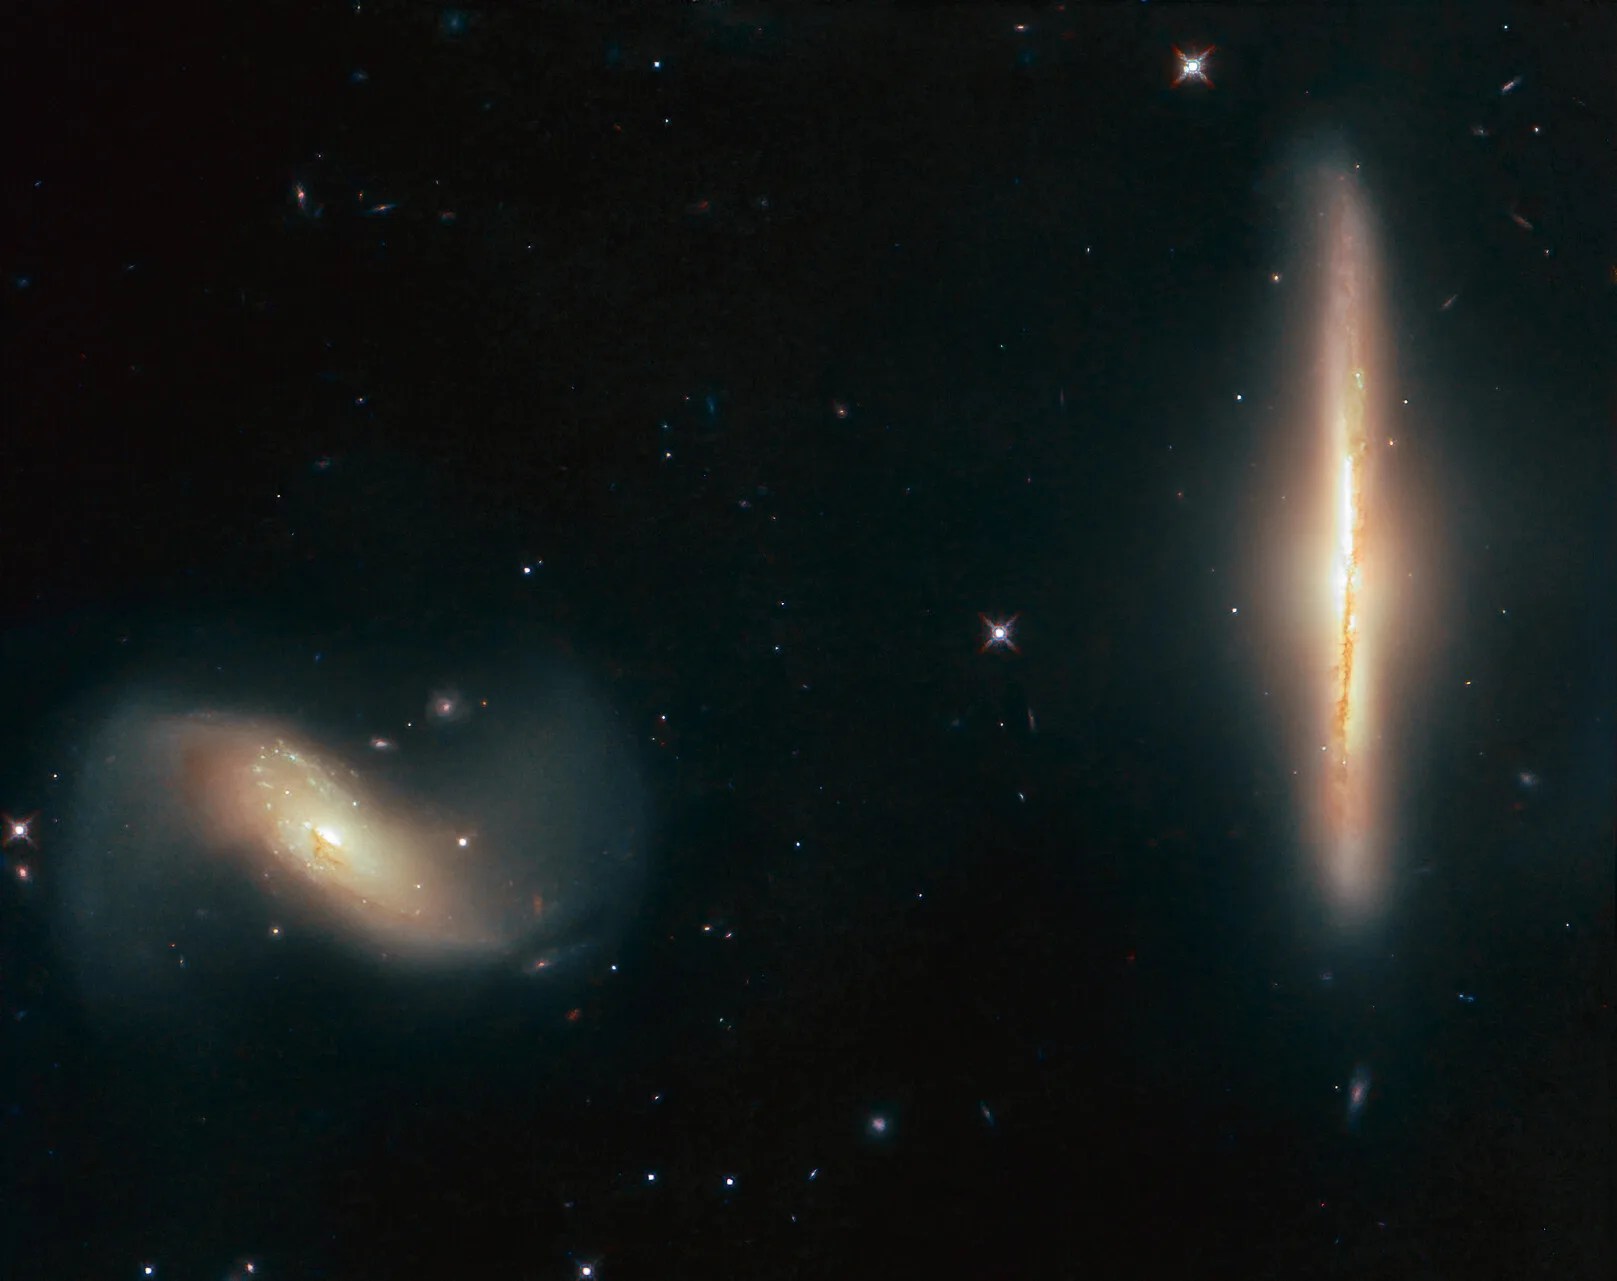 Hubble image of ngc 6285 (left) and ngc 6286 (right)